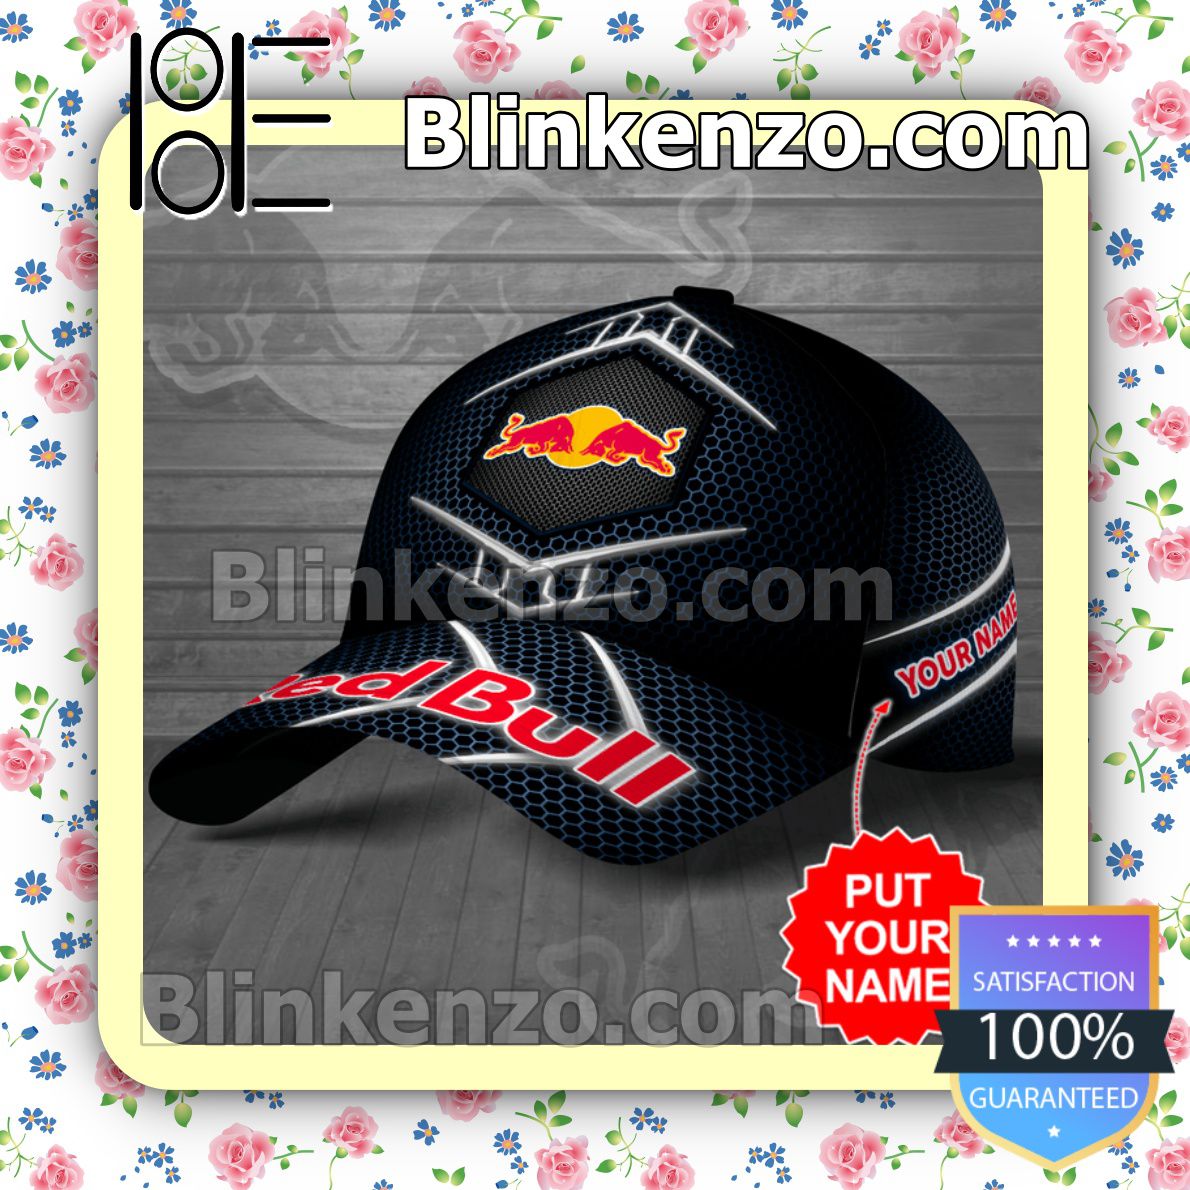 Sale Off Personalized Red Bull Hive Pattern Baseball Caps Gift For Boyfriend